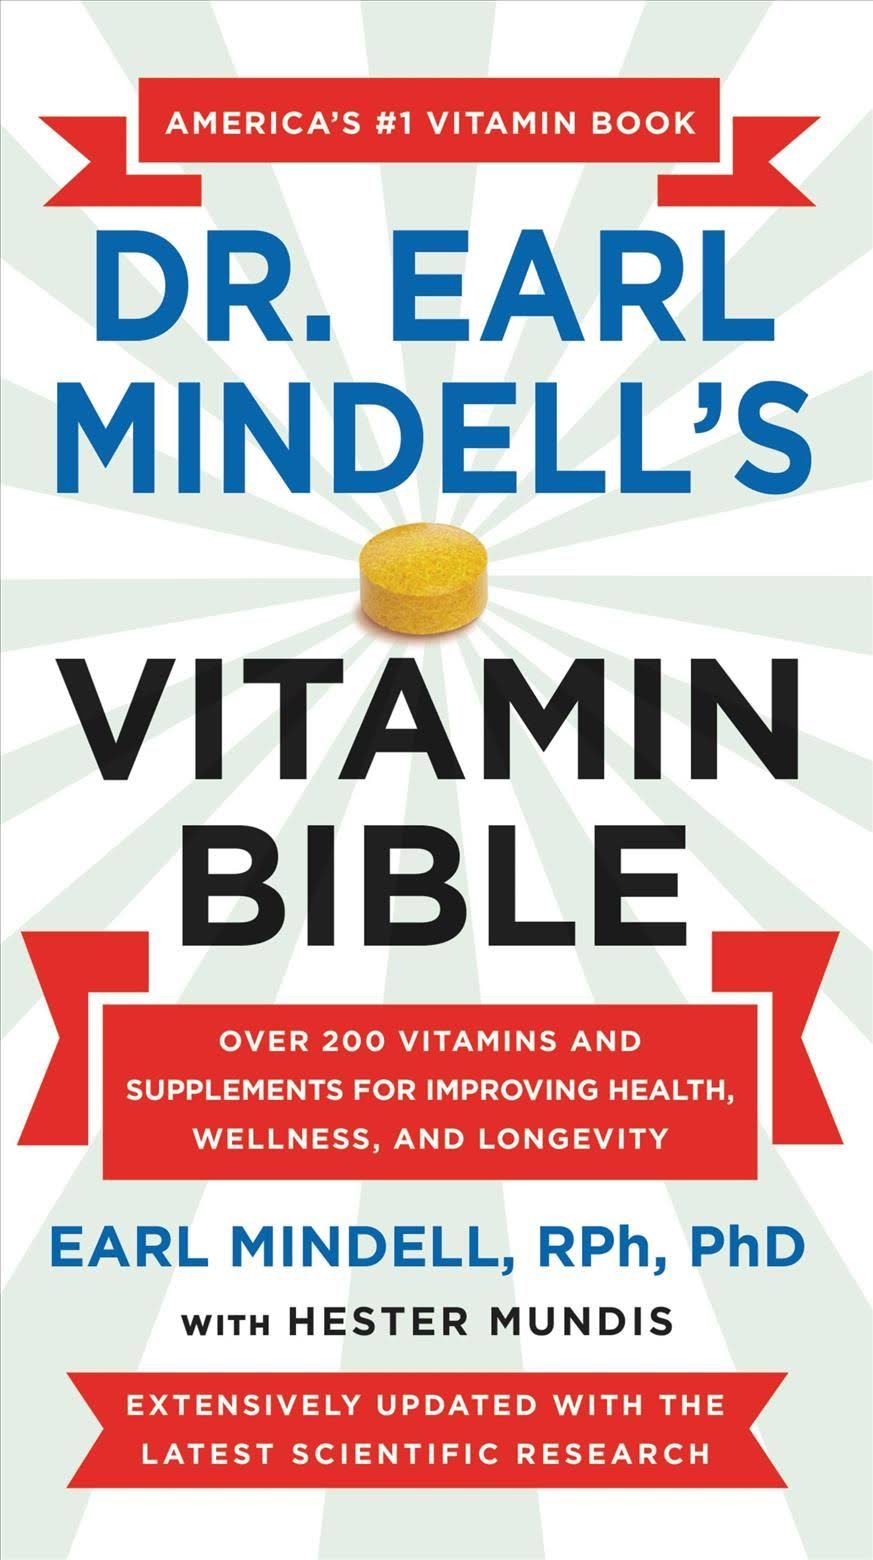 Dr. Earl Mindell's Vitamin Bible by Earl Mindell